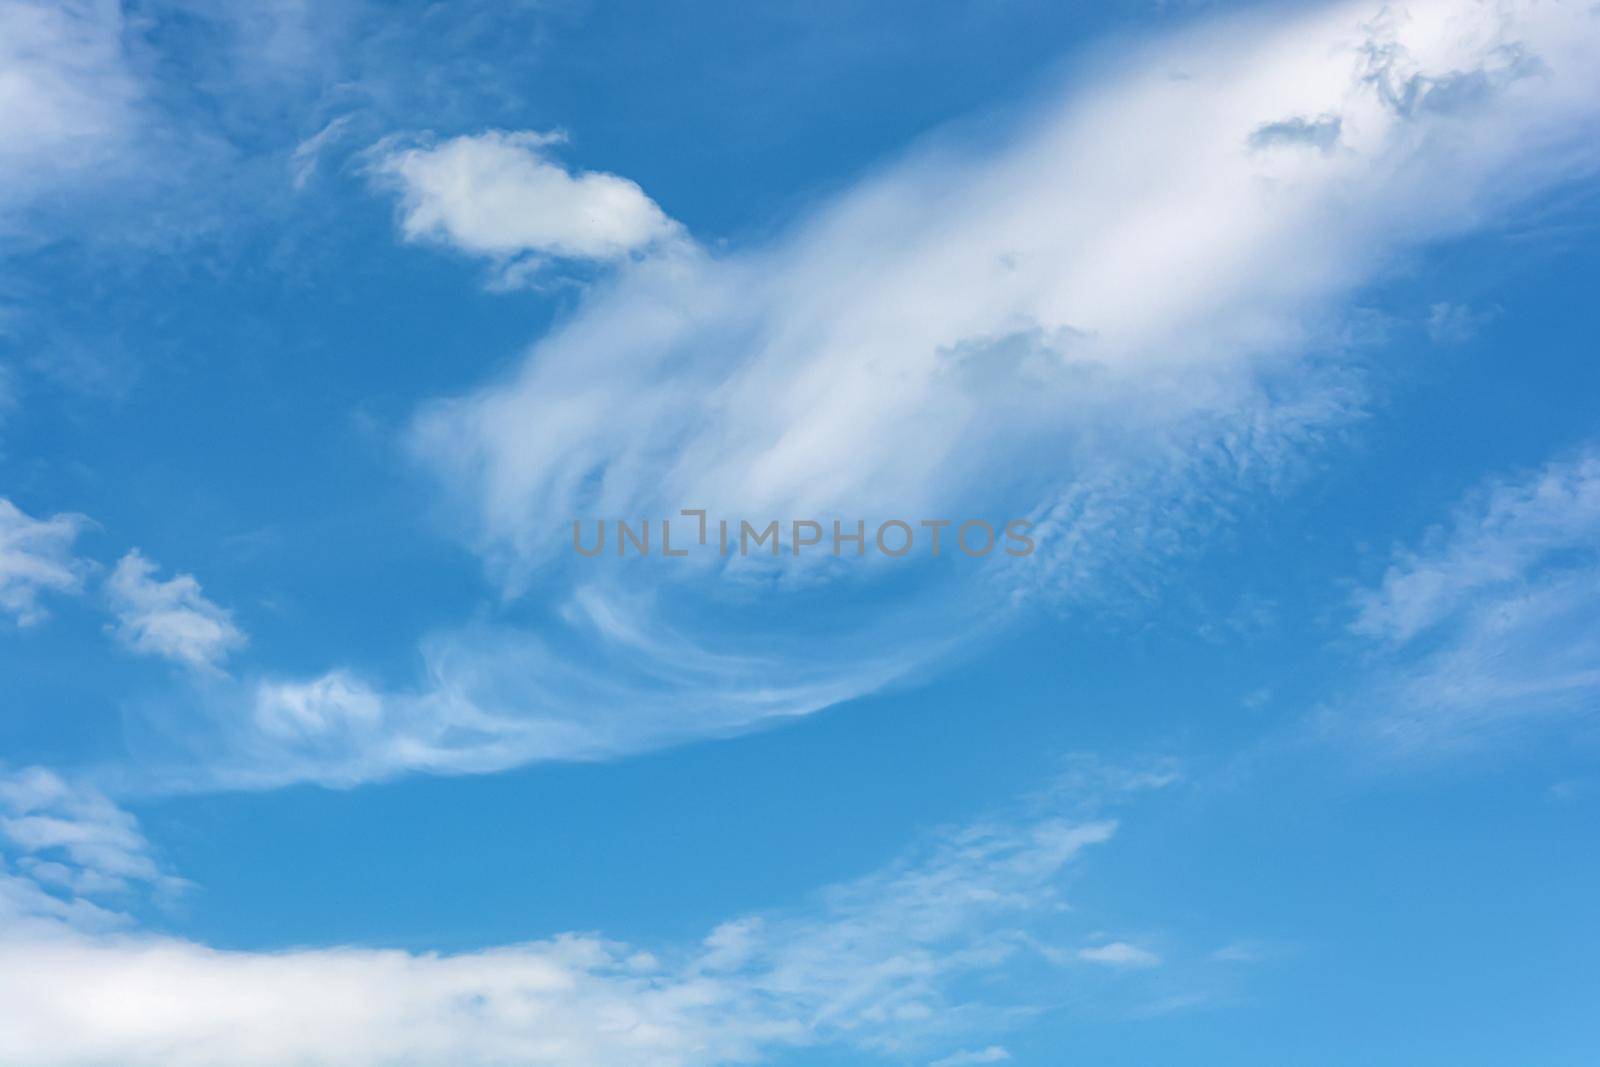 White cirrus clouds against the blue sky. Close-up, blurred, background. Stock photography.